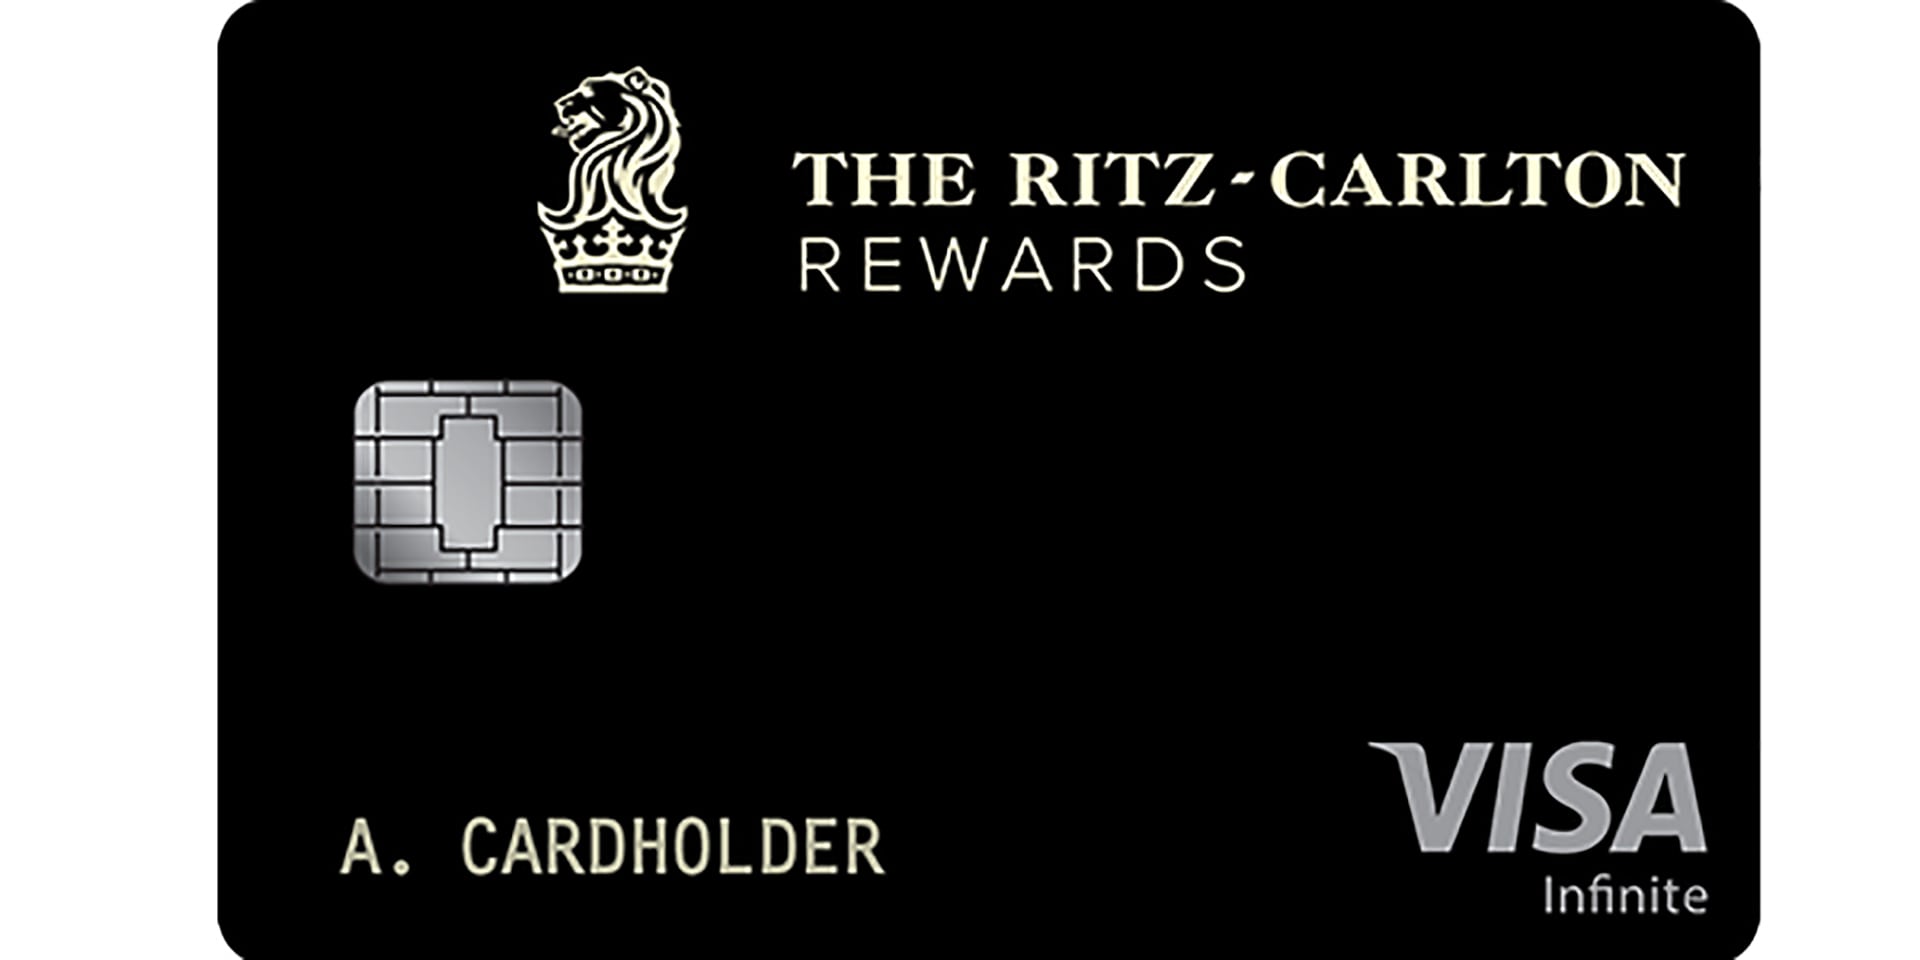 Marriott Rewards, Starwood Preferred Guest, and even the Ritz-Carlton loyalty program will participate in a system for new bonuses among credit card holders. 